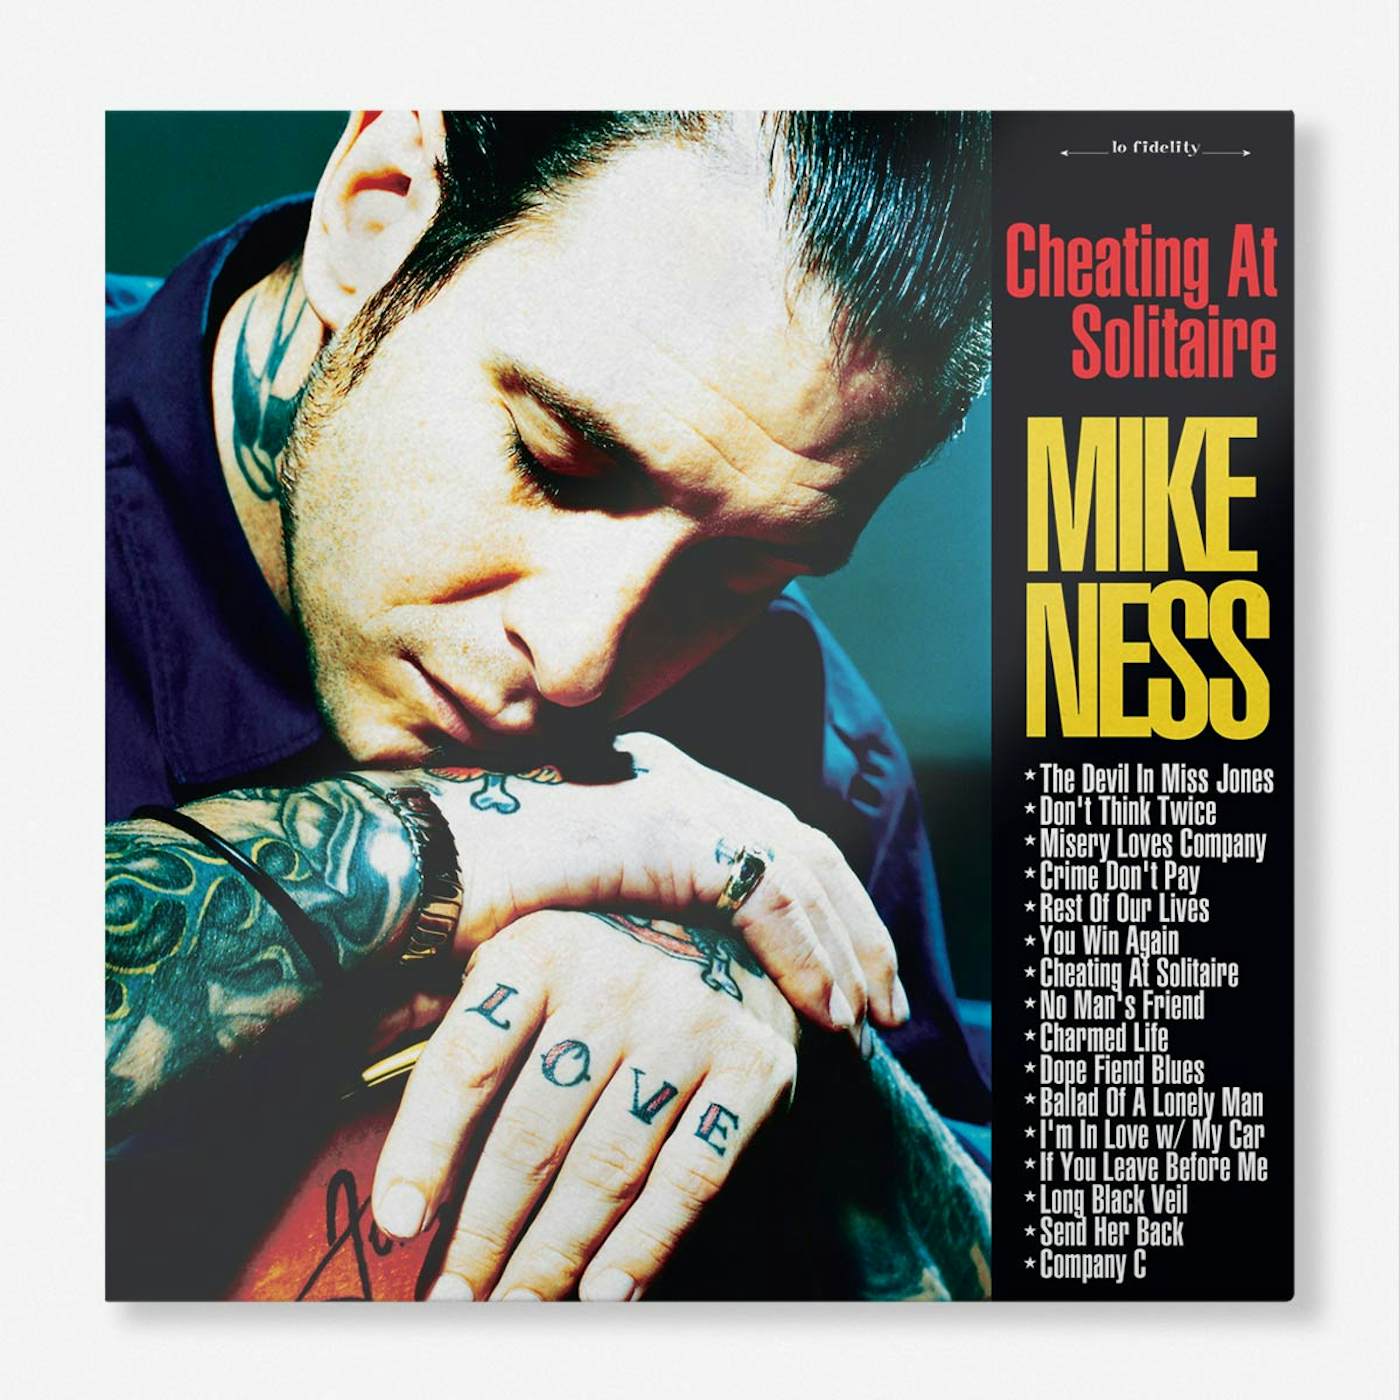 Mike Ness Cheating at Solitaire (2-LP) (Vinyl)